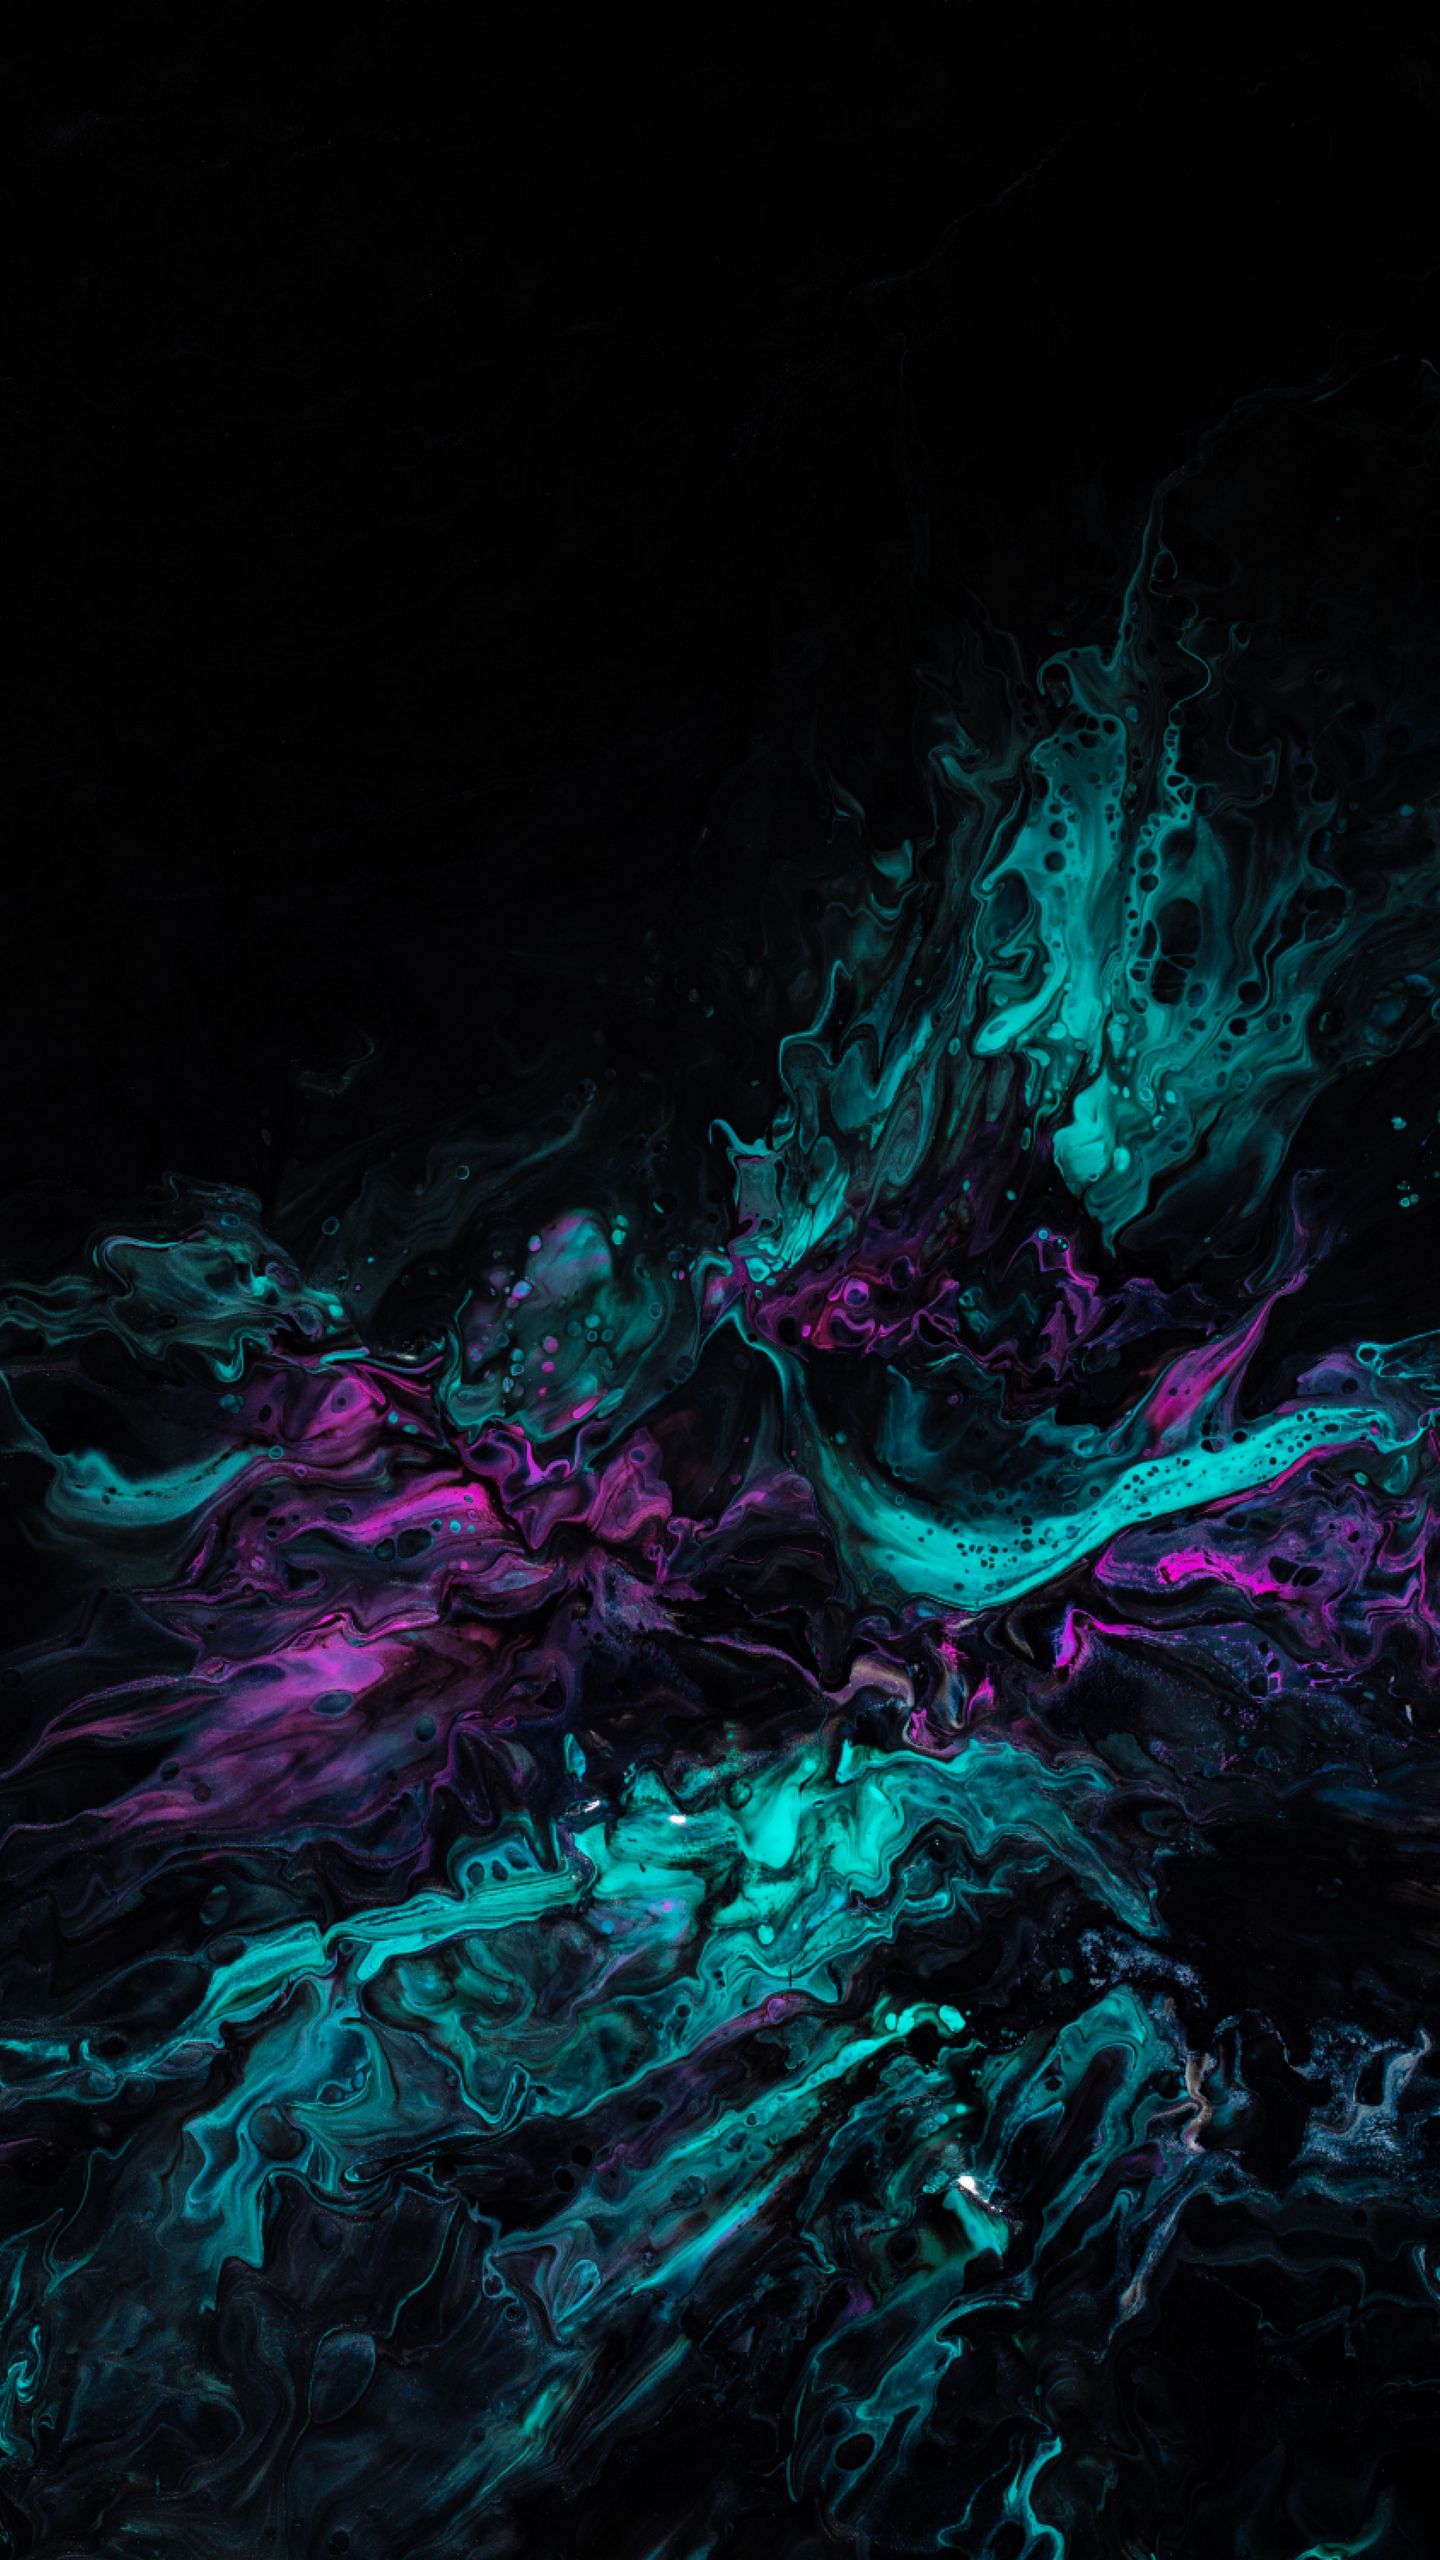 Download wallpaper 1440x2560 paint, stains, mixing, liquid, turquoise,  purple, dark qhd samsung galaxy s6, s7, edge, note, lg g4 hd background